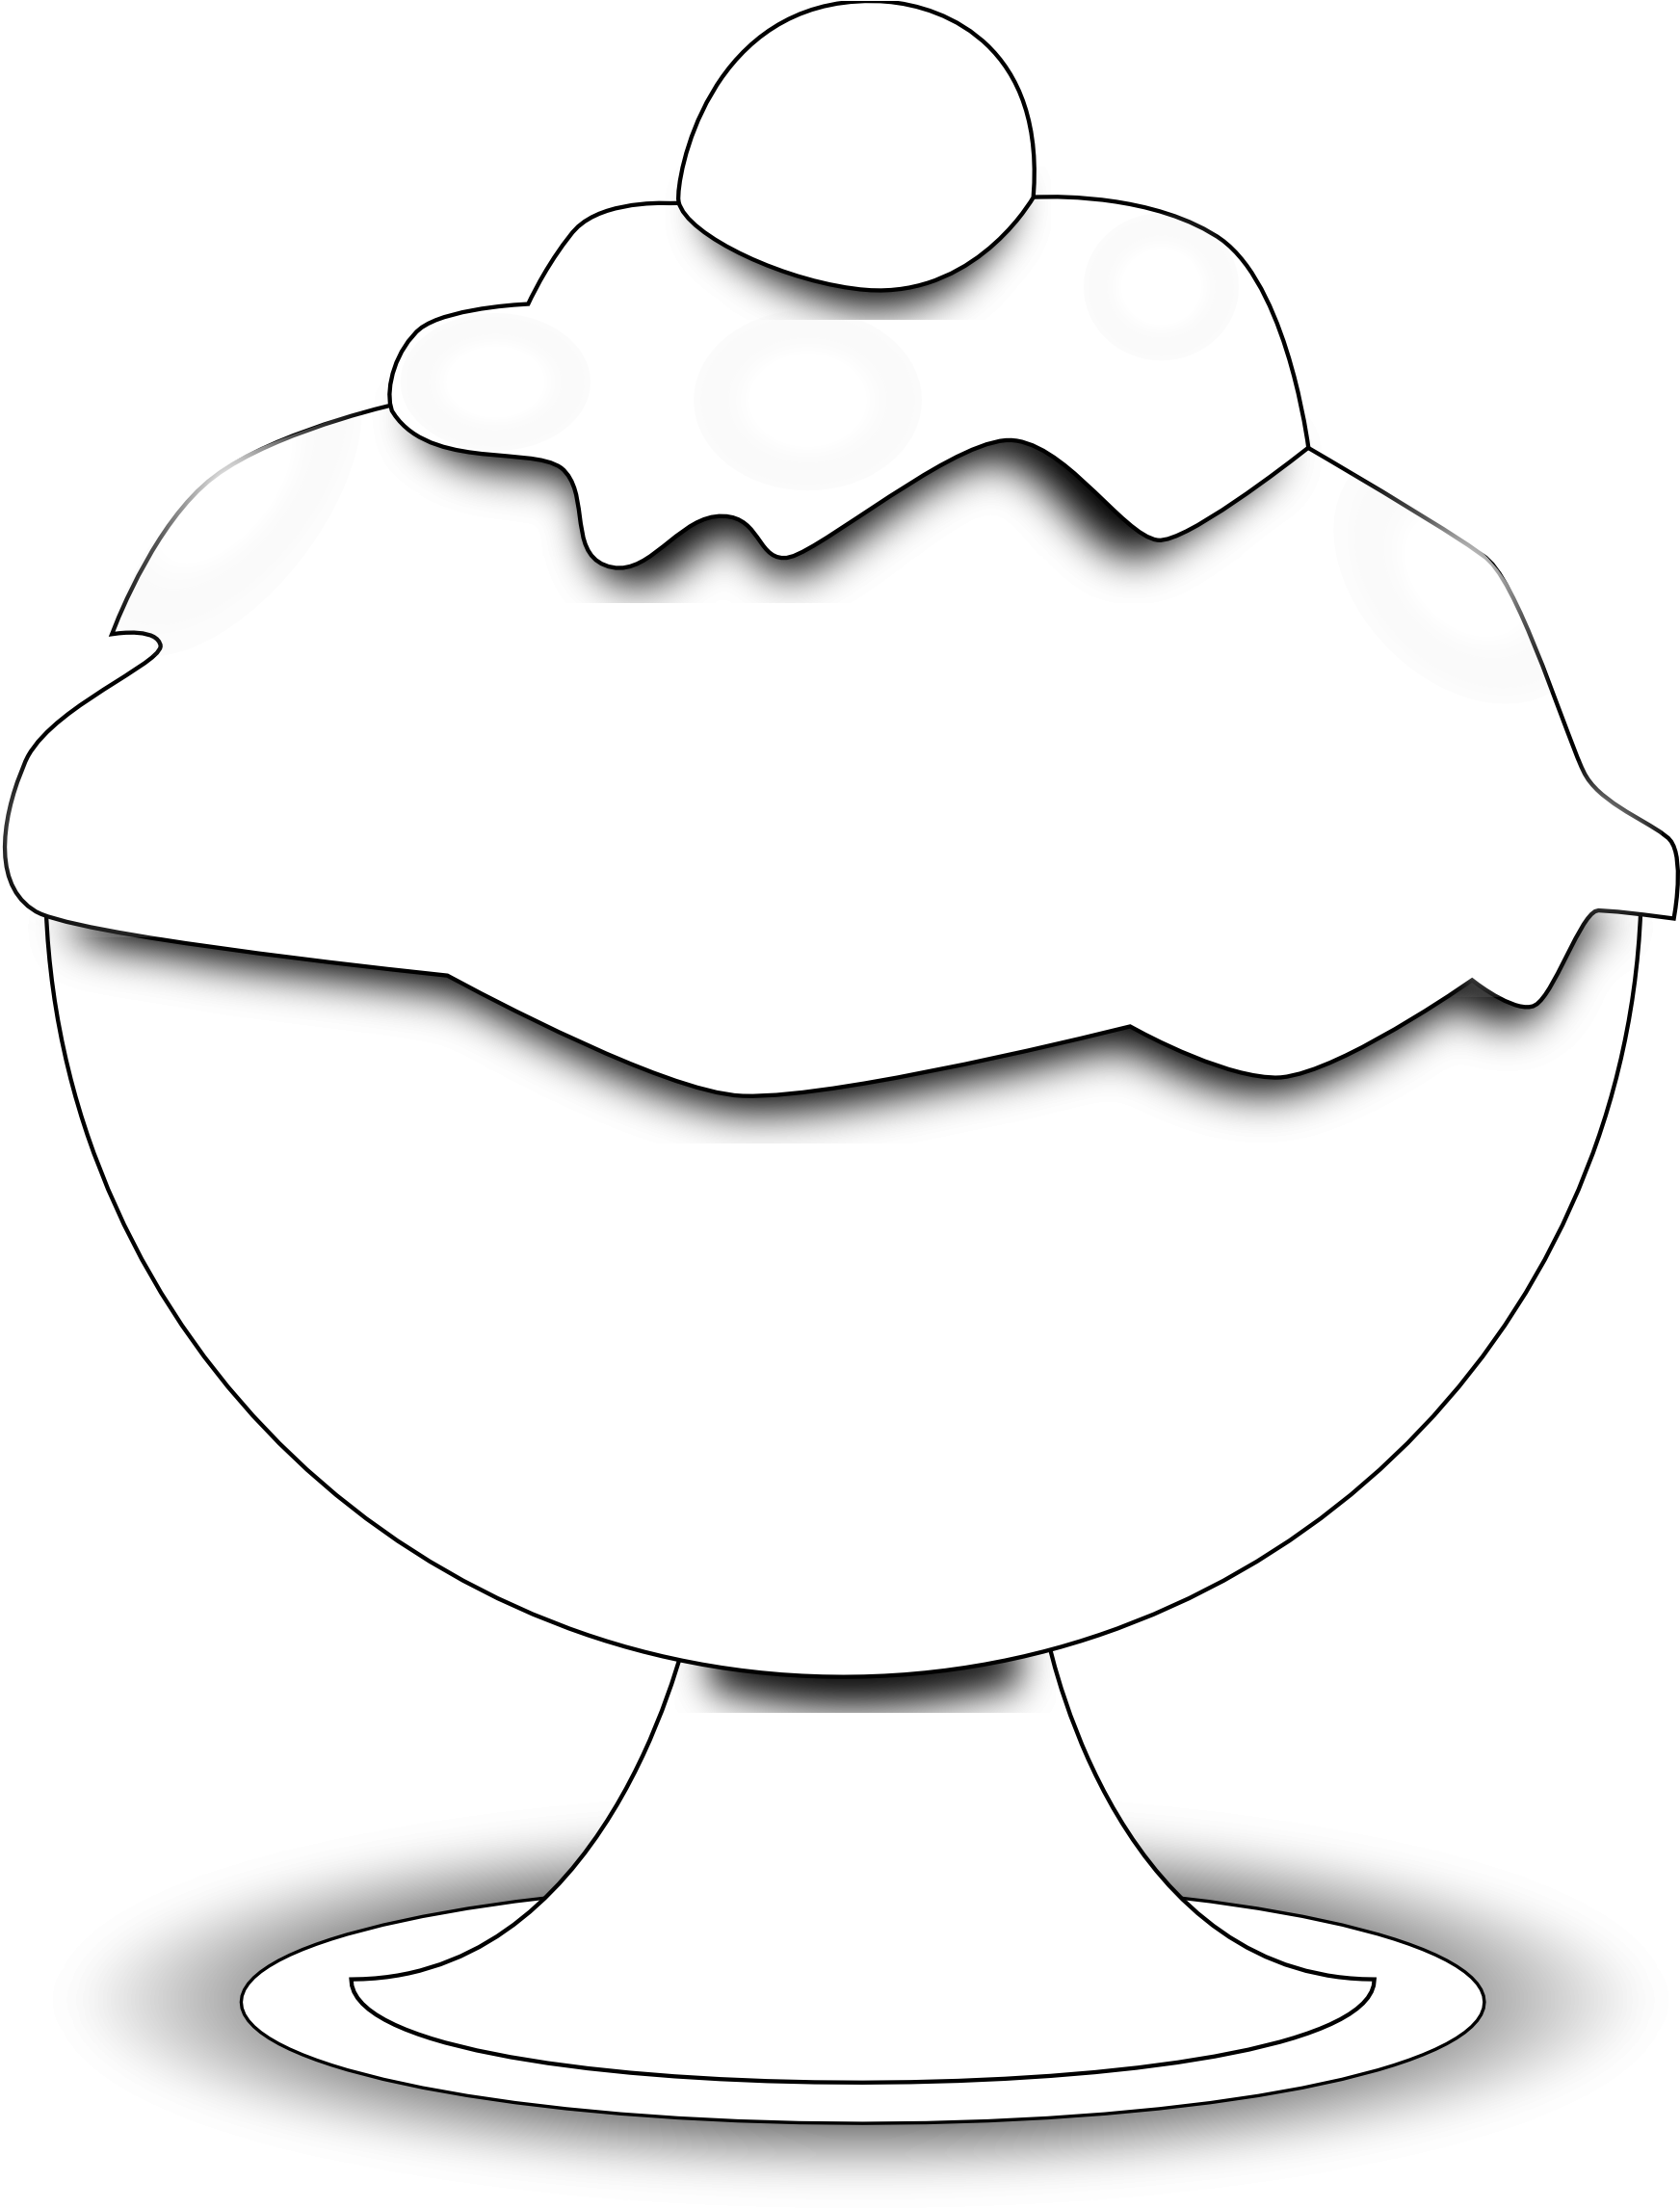 Download Ice Cream Clipart Black And White Ice Cream Clipart Black And White Png Png Image With No Background Pngkey Com